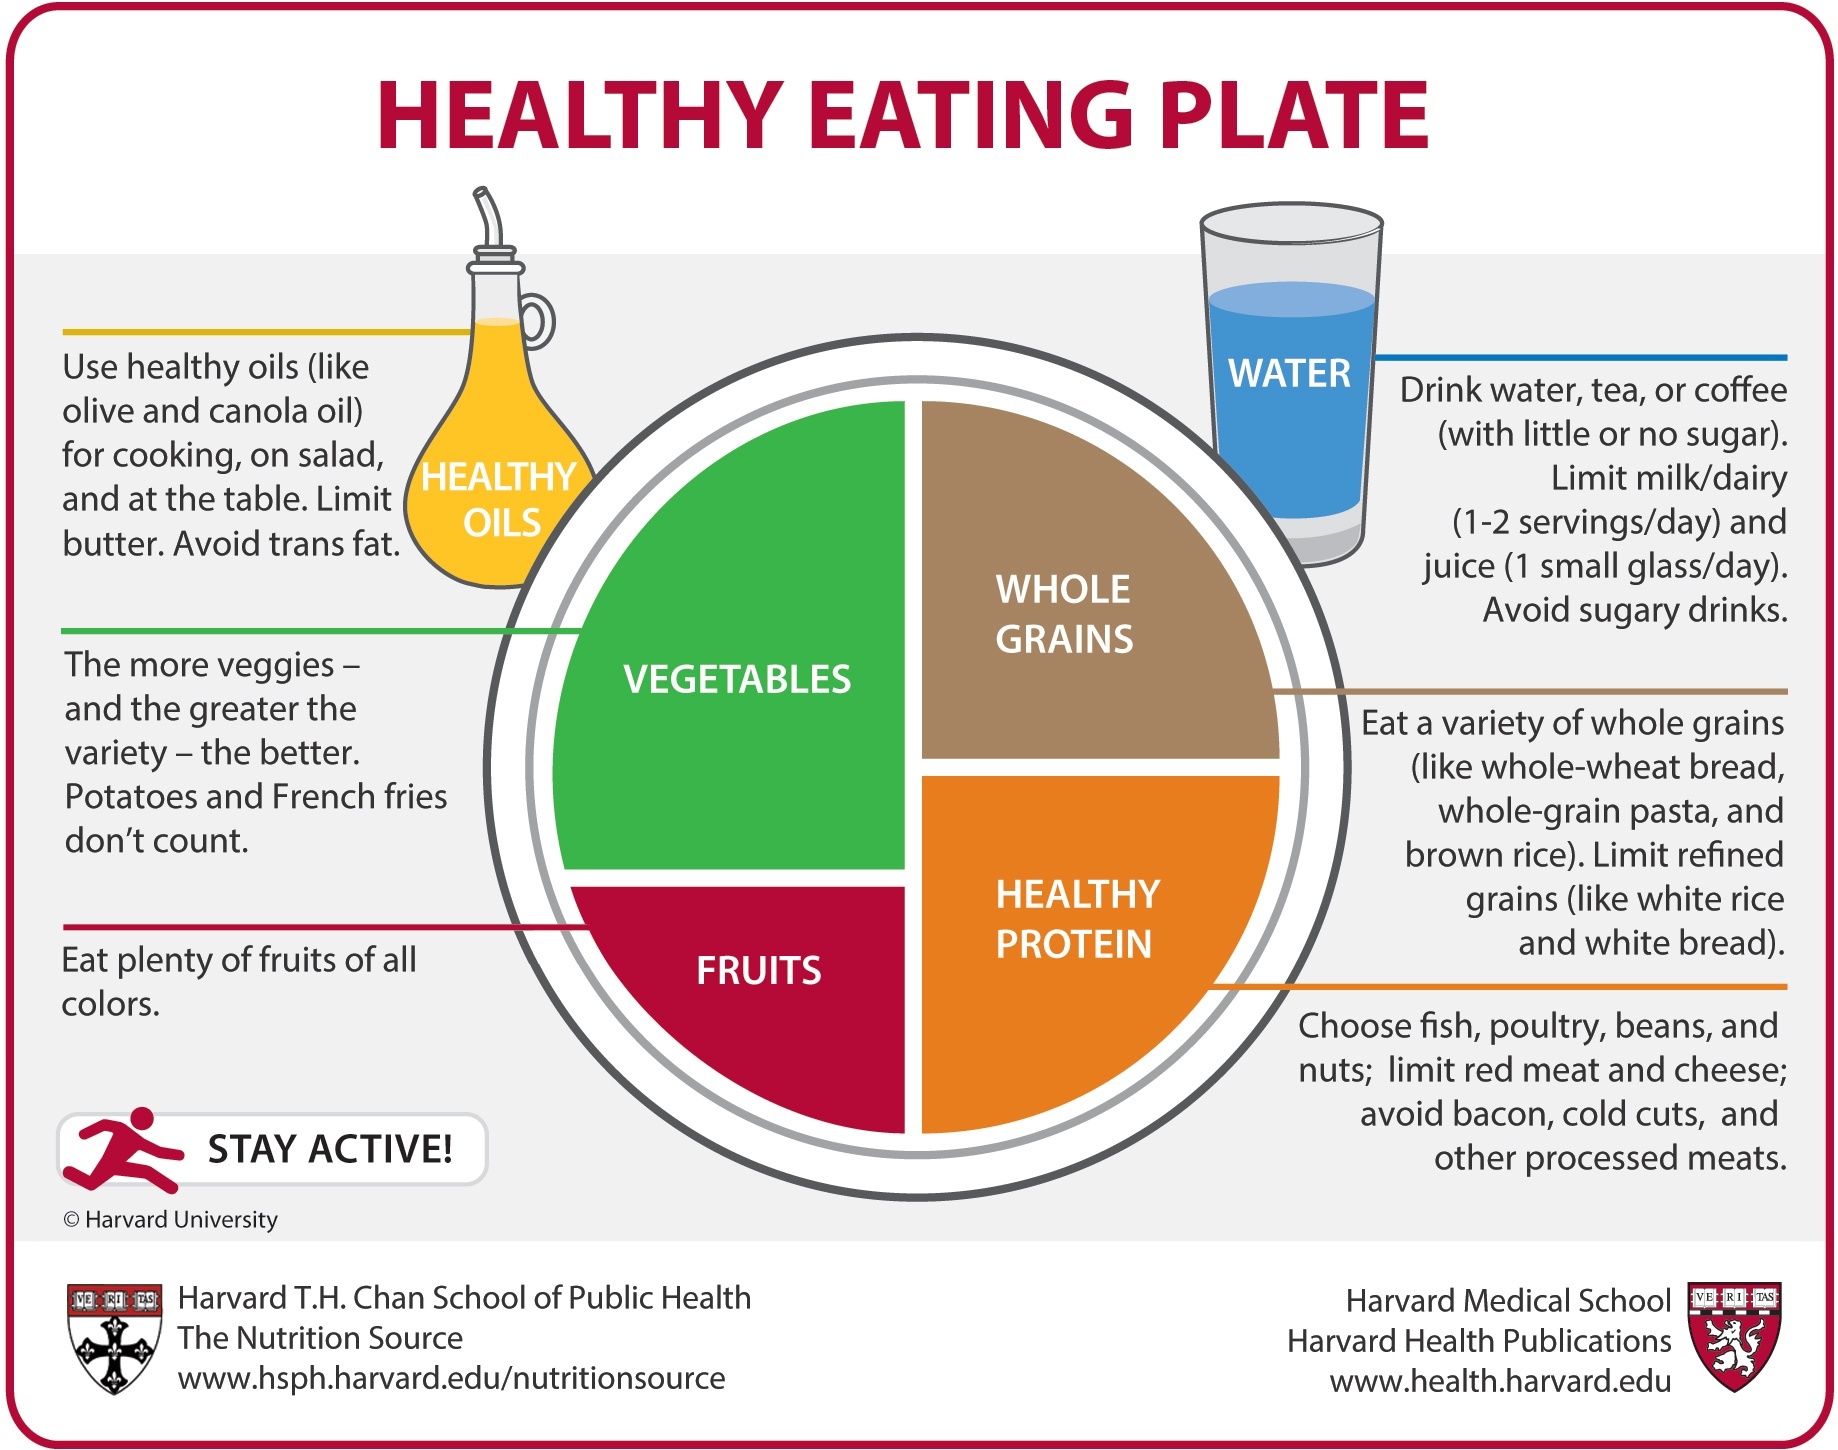 Image of a healthy eating plate, divided into vegetables, whole grains, fruits, and healthy protein.